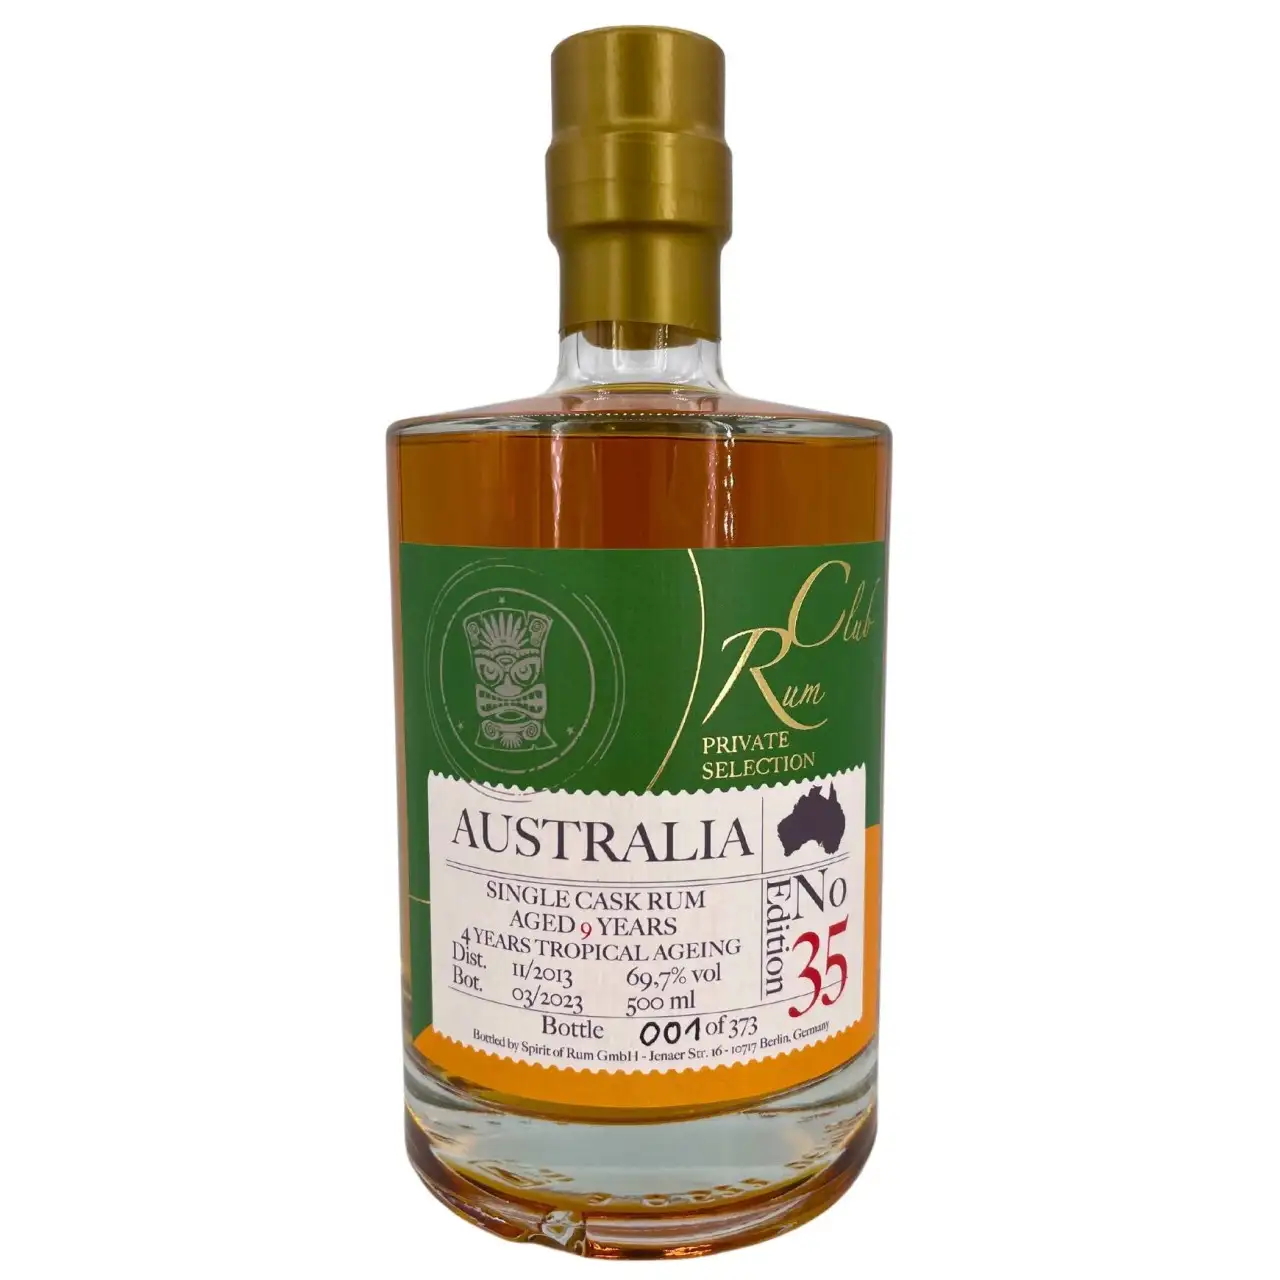 Image of the front of the bottle of the rum Rumclub Private Selection Ed. 35 Australia